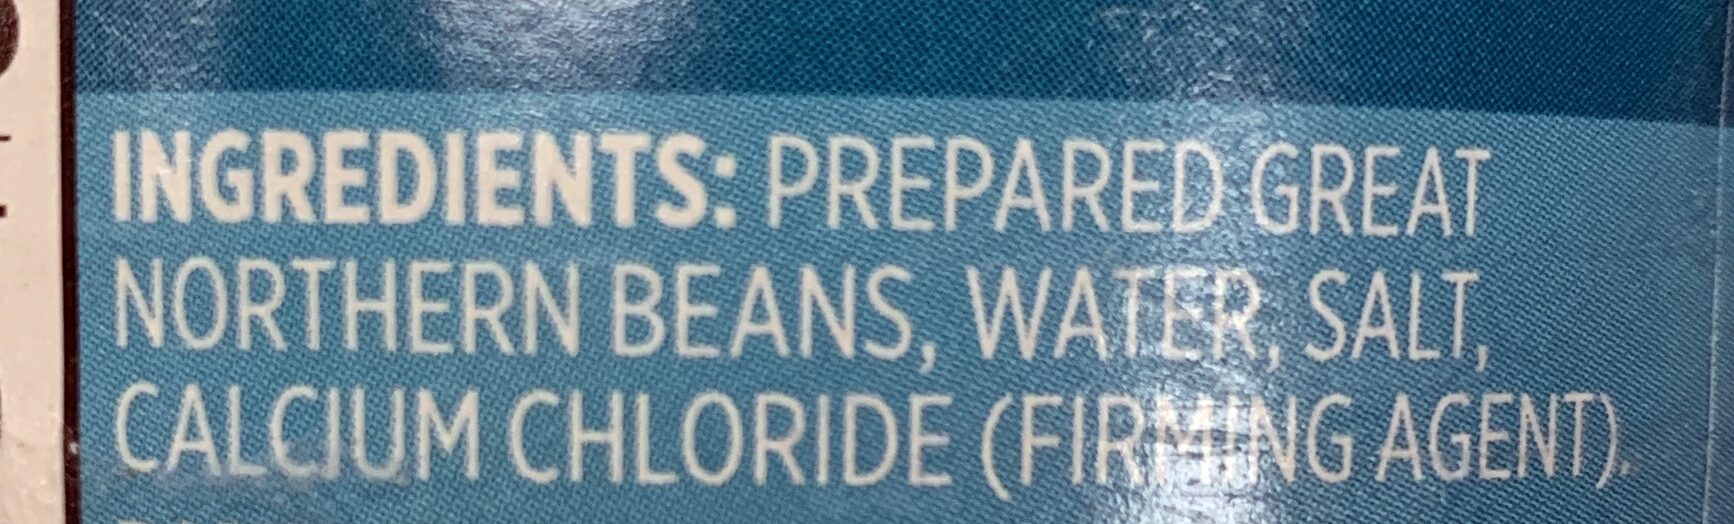 Great Northern Beans (low sodium) - Ingredients